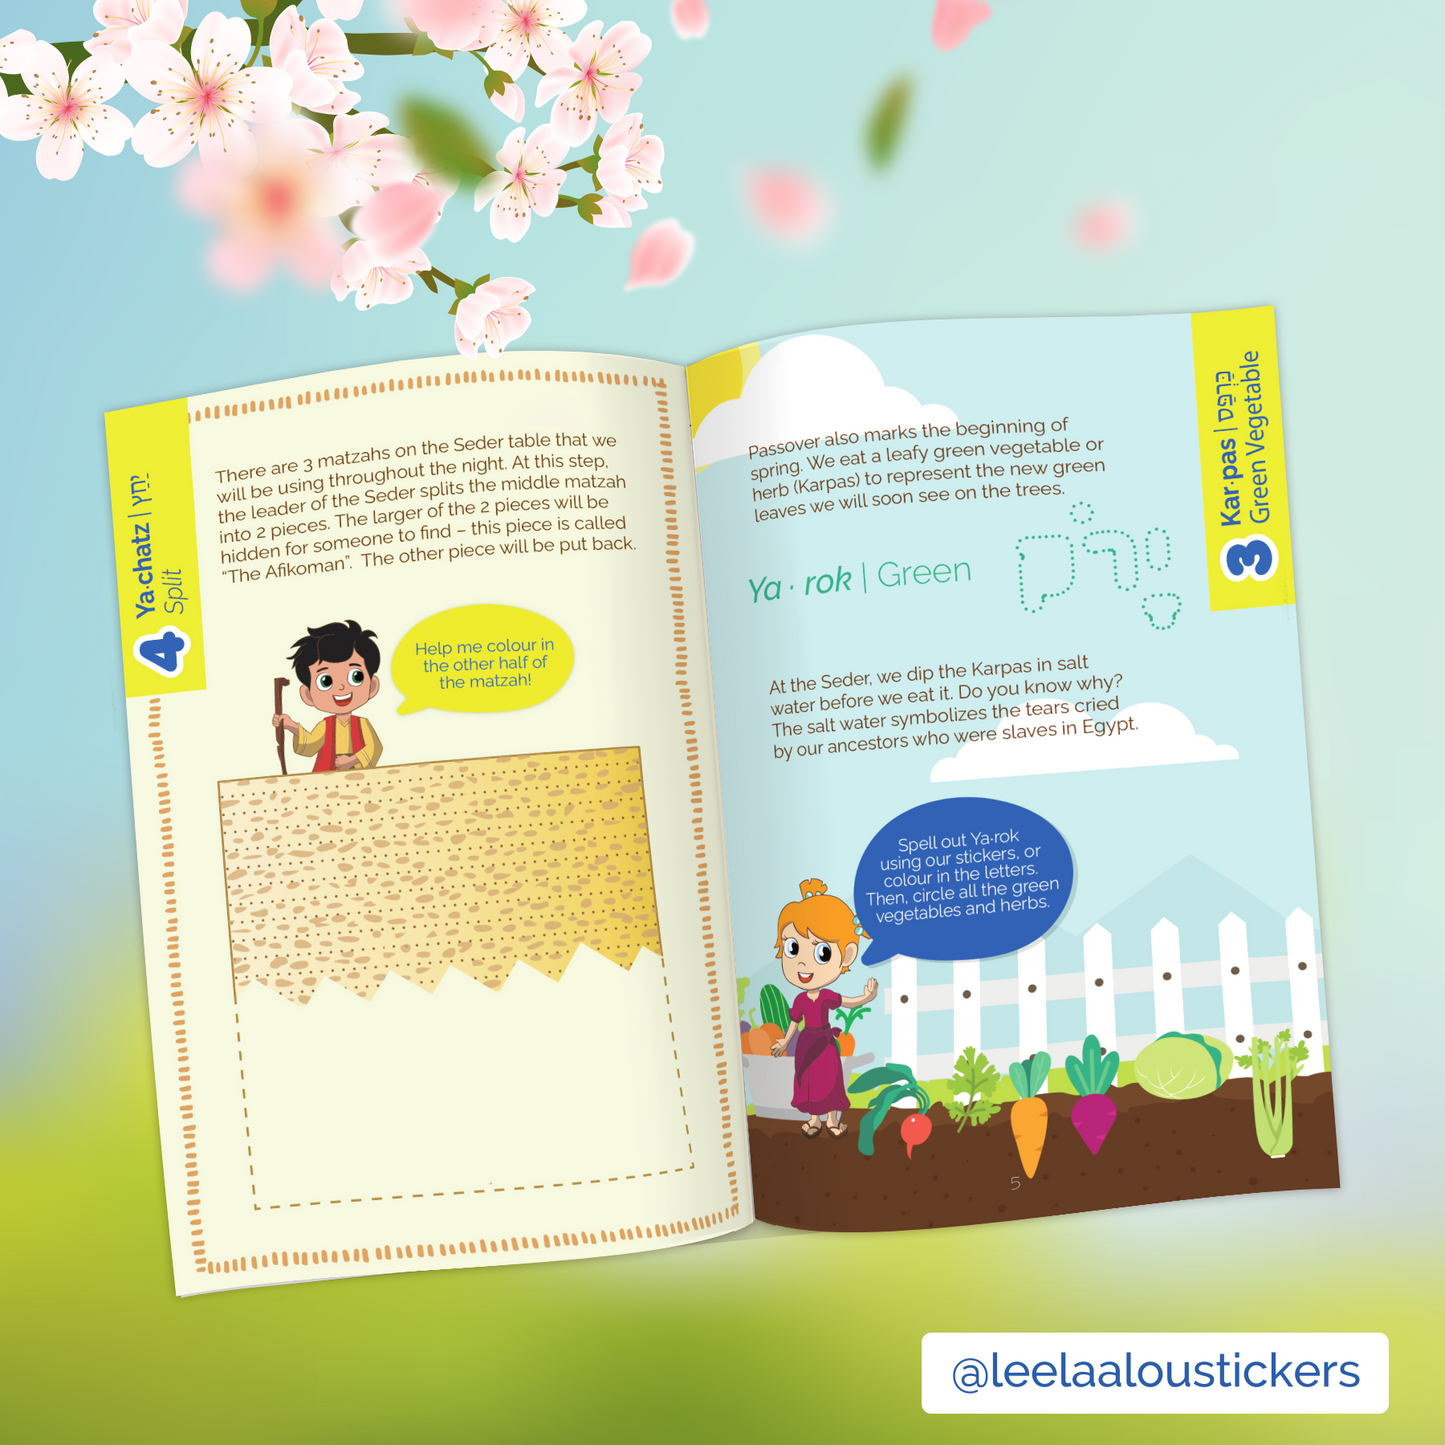 The Passover Haggadah Companion - A sticker activity booklet